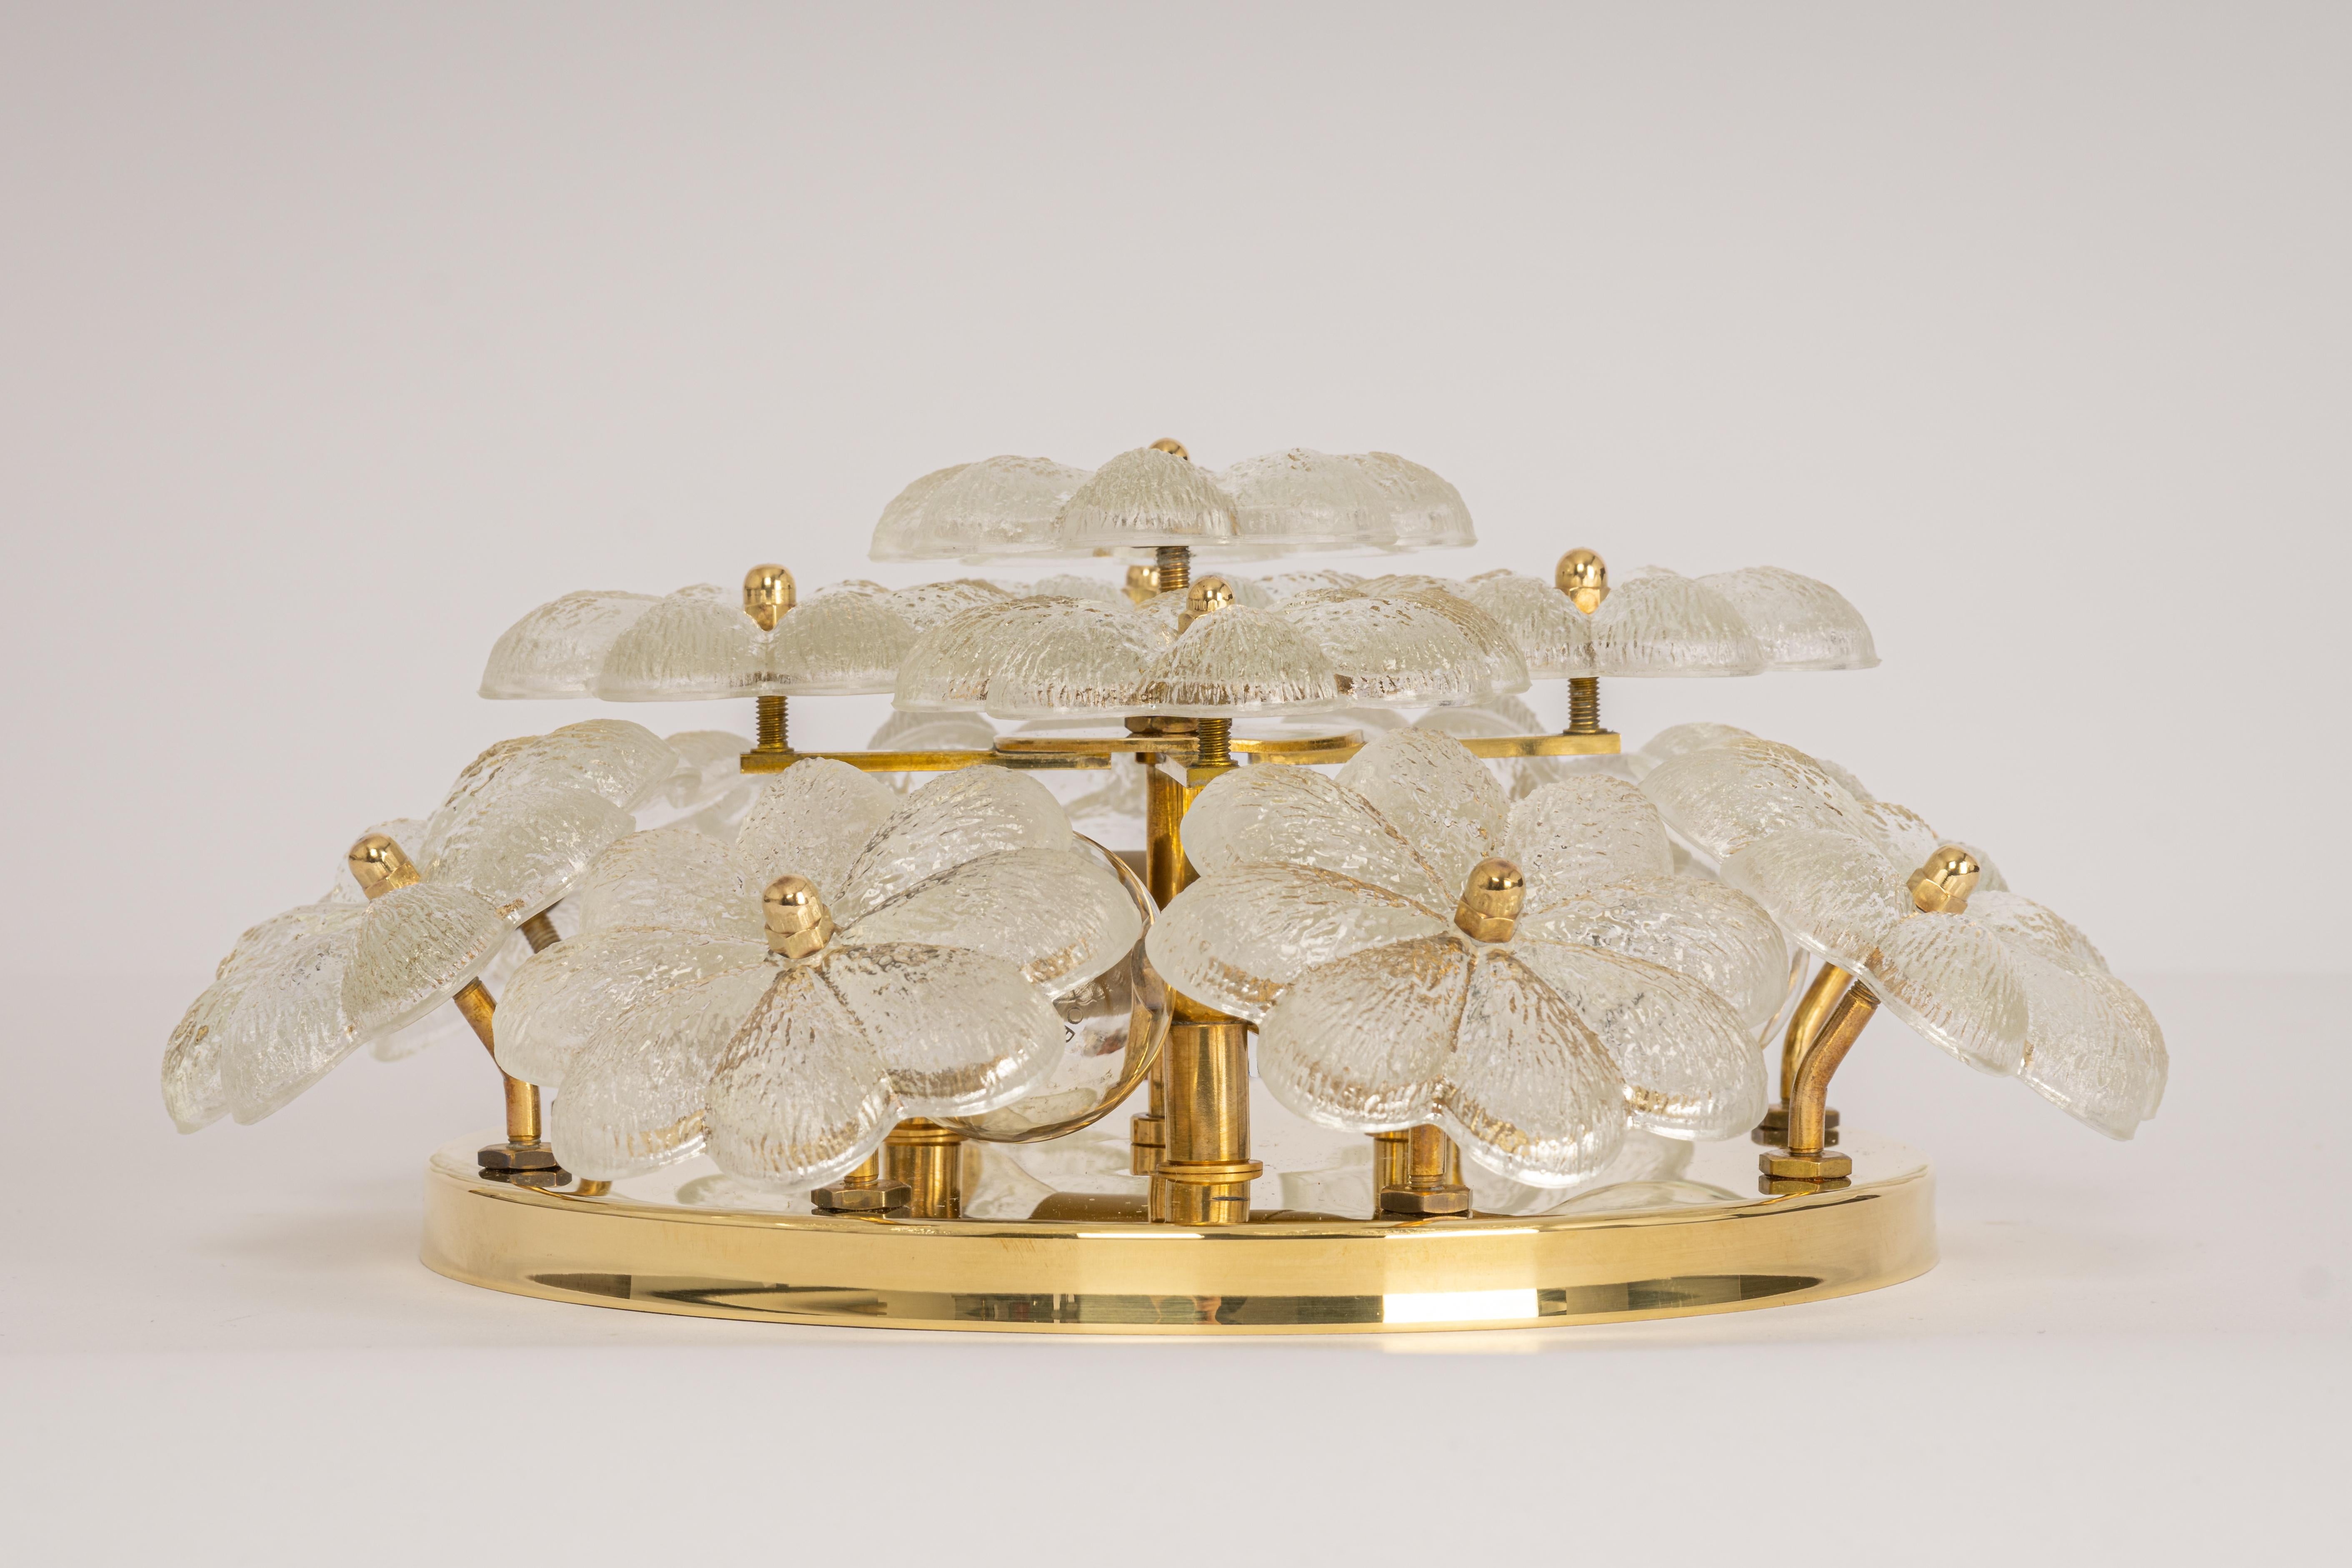 Petite Midcentury flush mount light or wall sconce with 13 Murano glass flowers over a polished brass base, made by Ernst Palme in Germany, 1970s
Wonderful light effect.
High quality and in very good condition. Cleaned, well-wired, and ready to use.